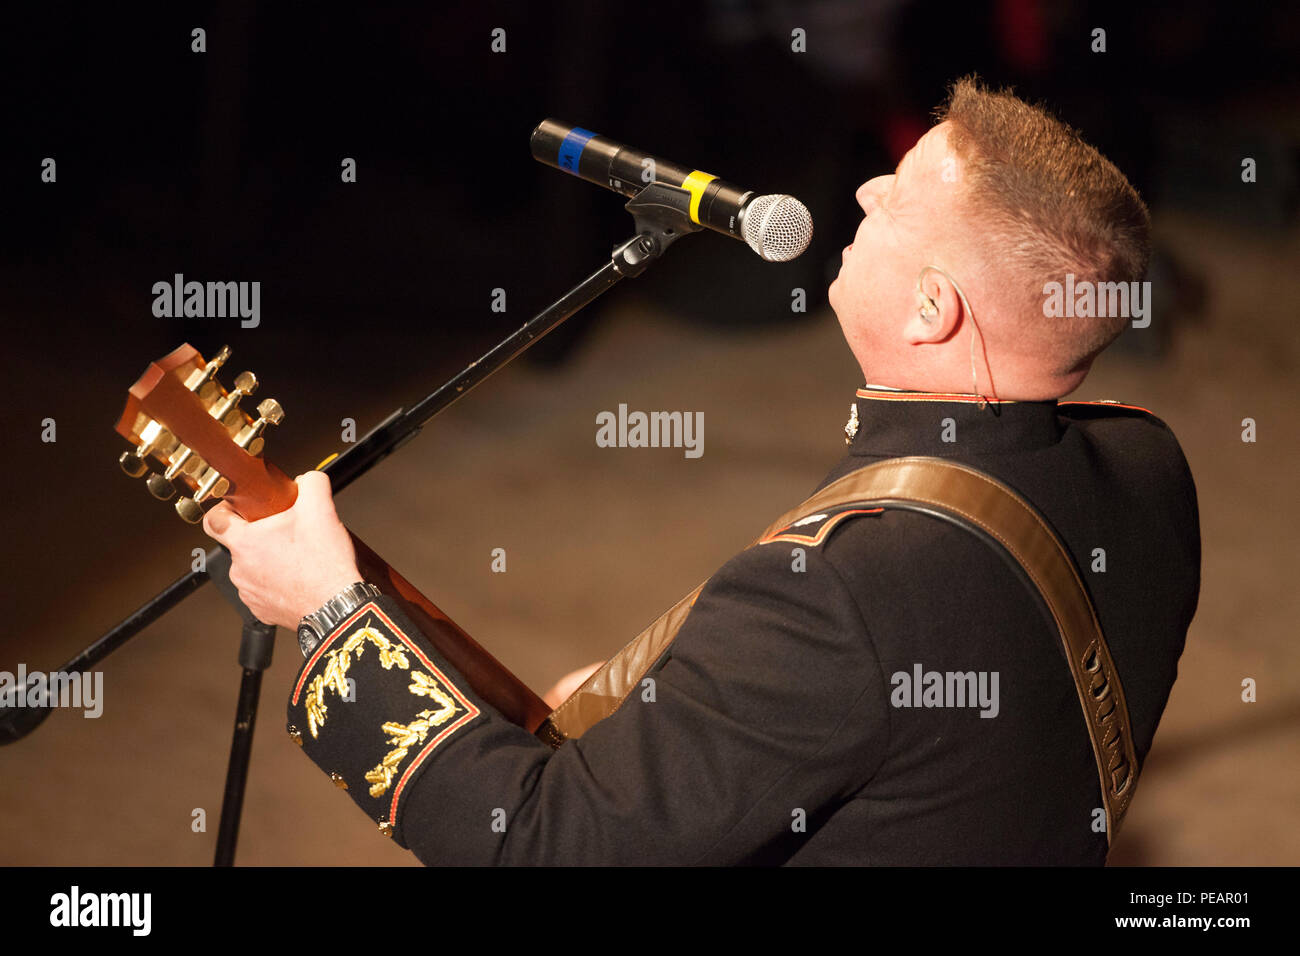 U.S. Marine Lt. Col. Michael Corrado, Deputy Assistant Chief of Staff G-3, 4th Marine Division, Marine Forces Reserve, performs his song “Stand” during the celebration of the 240th Marine Corps Birthday Ball at Mardi Gras World, New Orleans, La., Nov. 21, 2015. This year’s celebration honors those past, present, and future Marines throughout history and marks the 240th Marine Corps Birthday since its founding on Nov. 10, 1775. (U.S. Marine Corps photo by Kimberly Aguirre/Released) Stock Photo